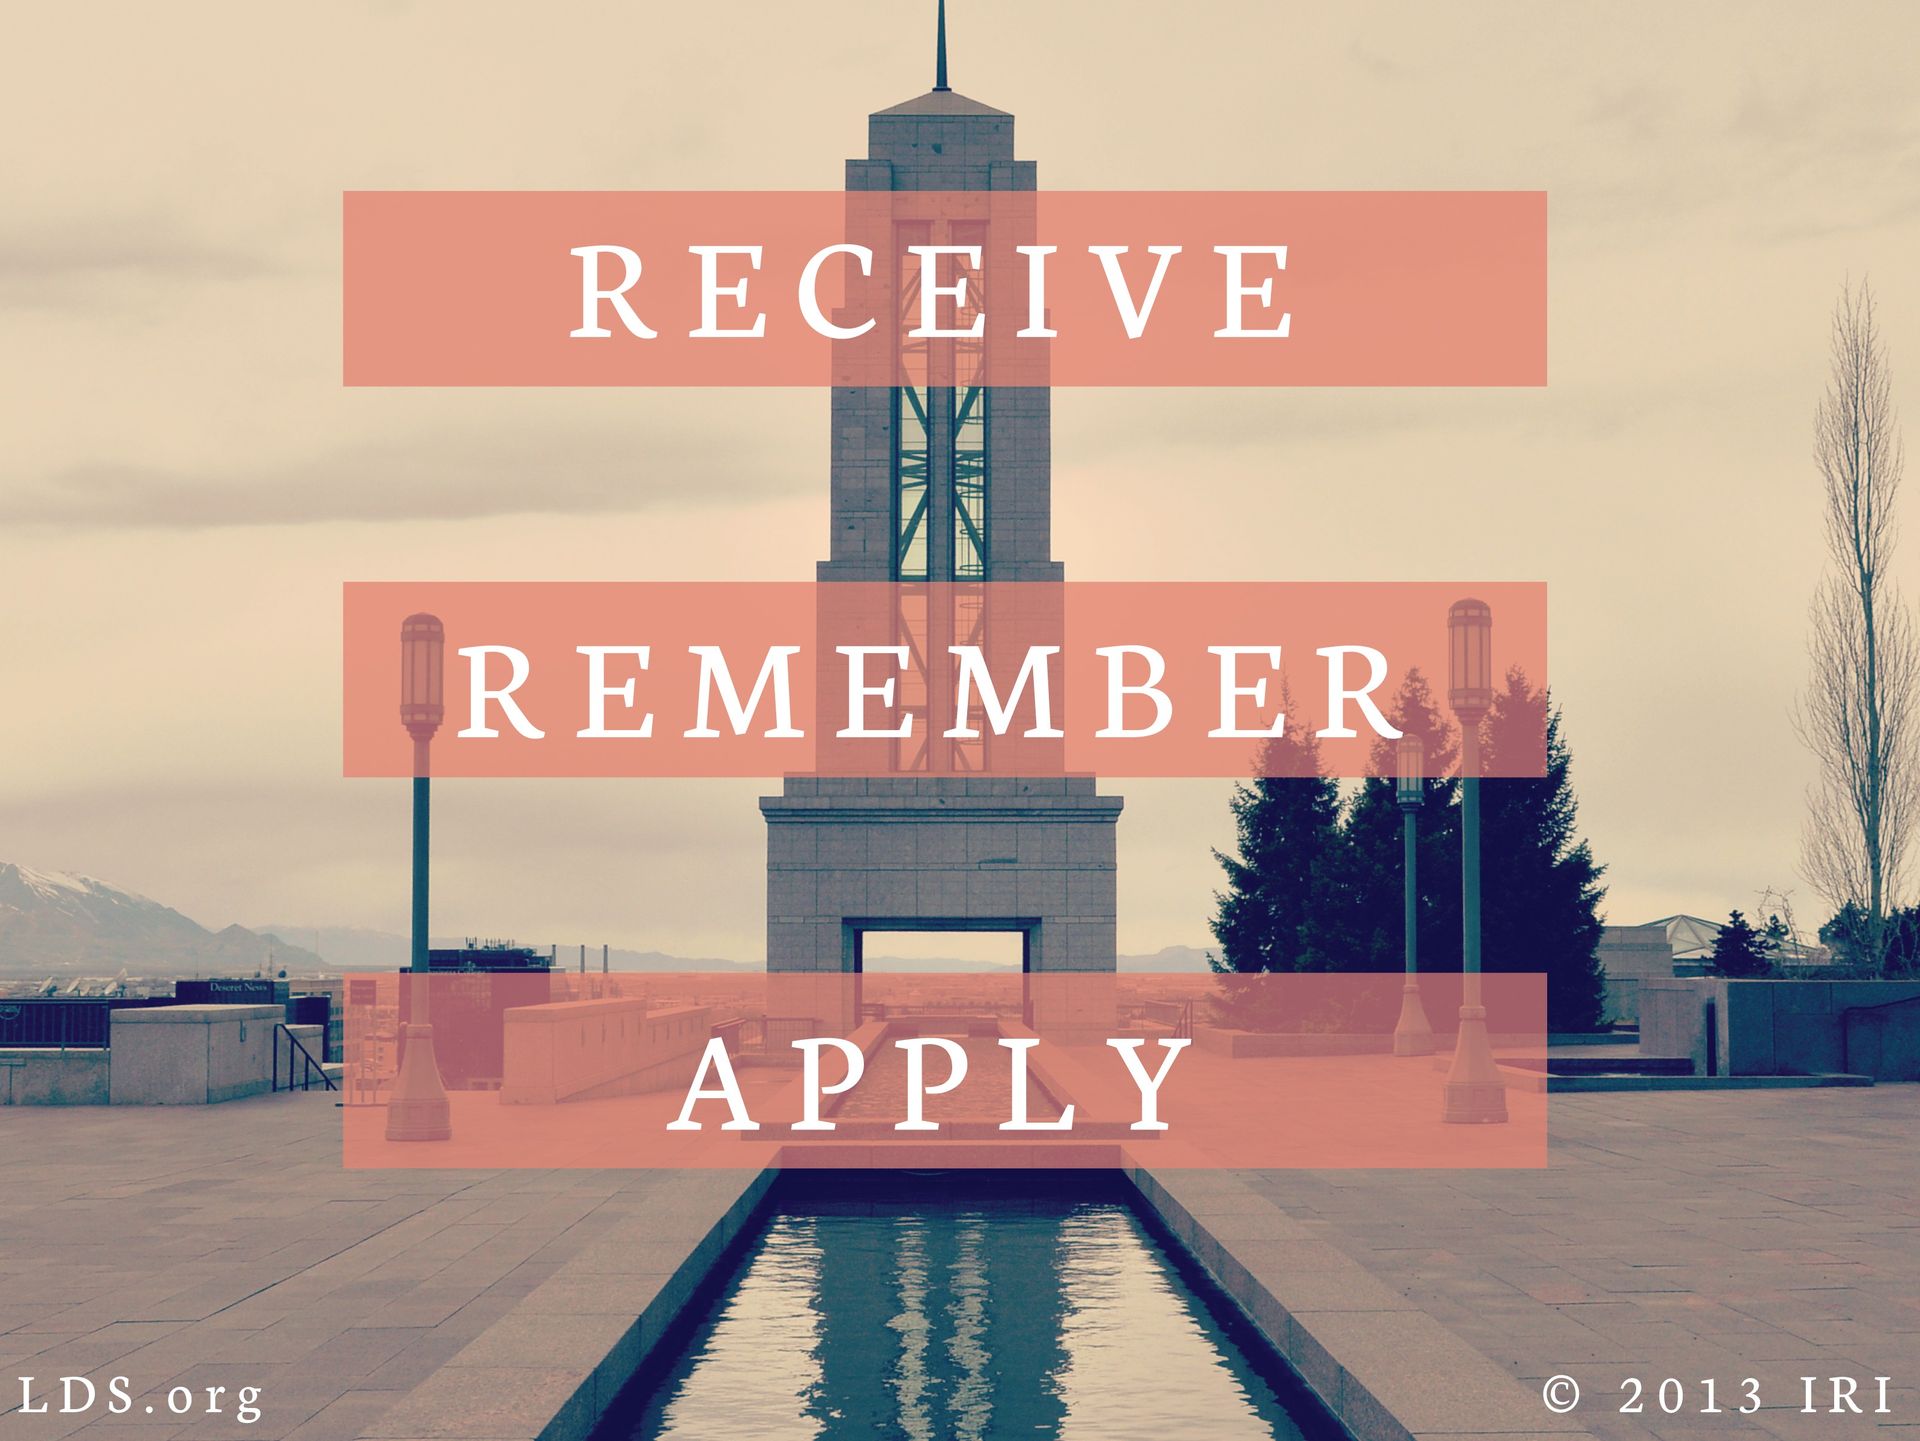 “Receive, remember, apply.” © undefined ipCode 1.